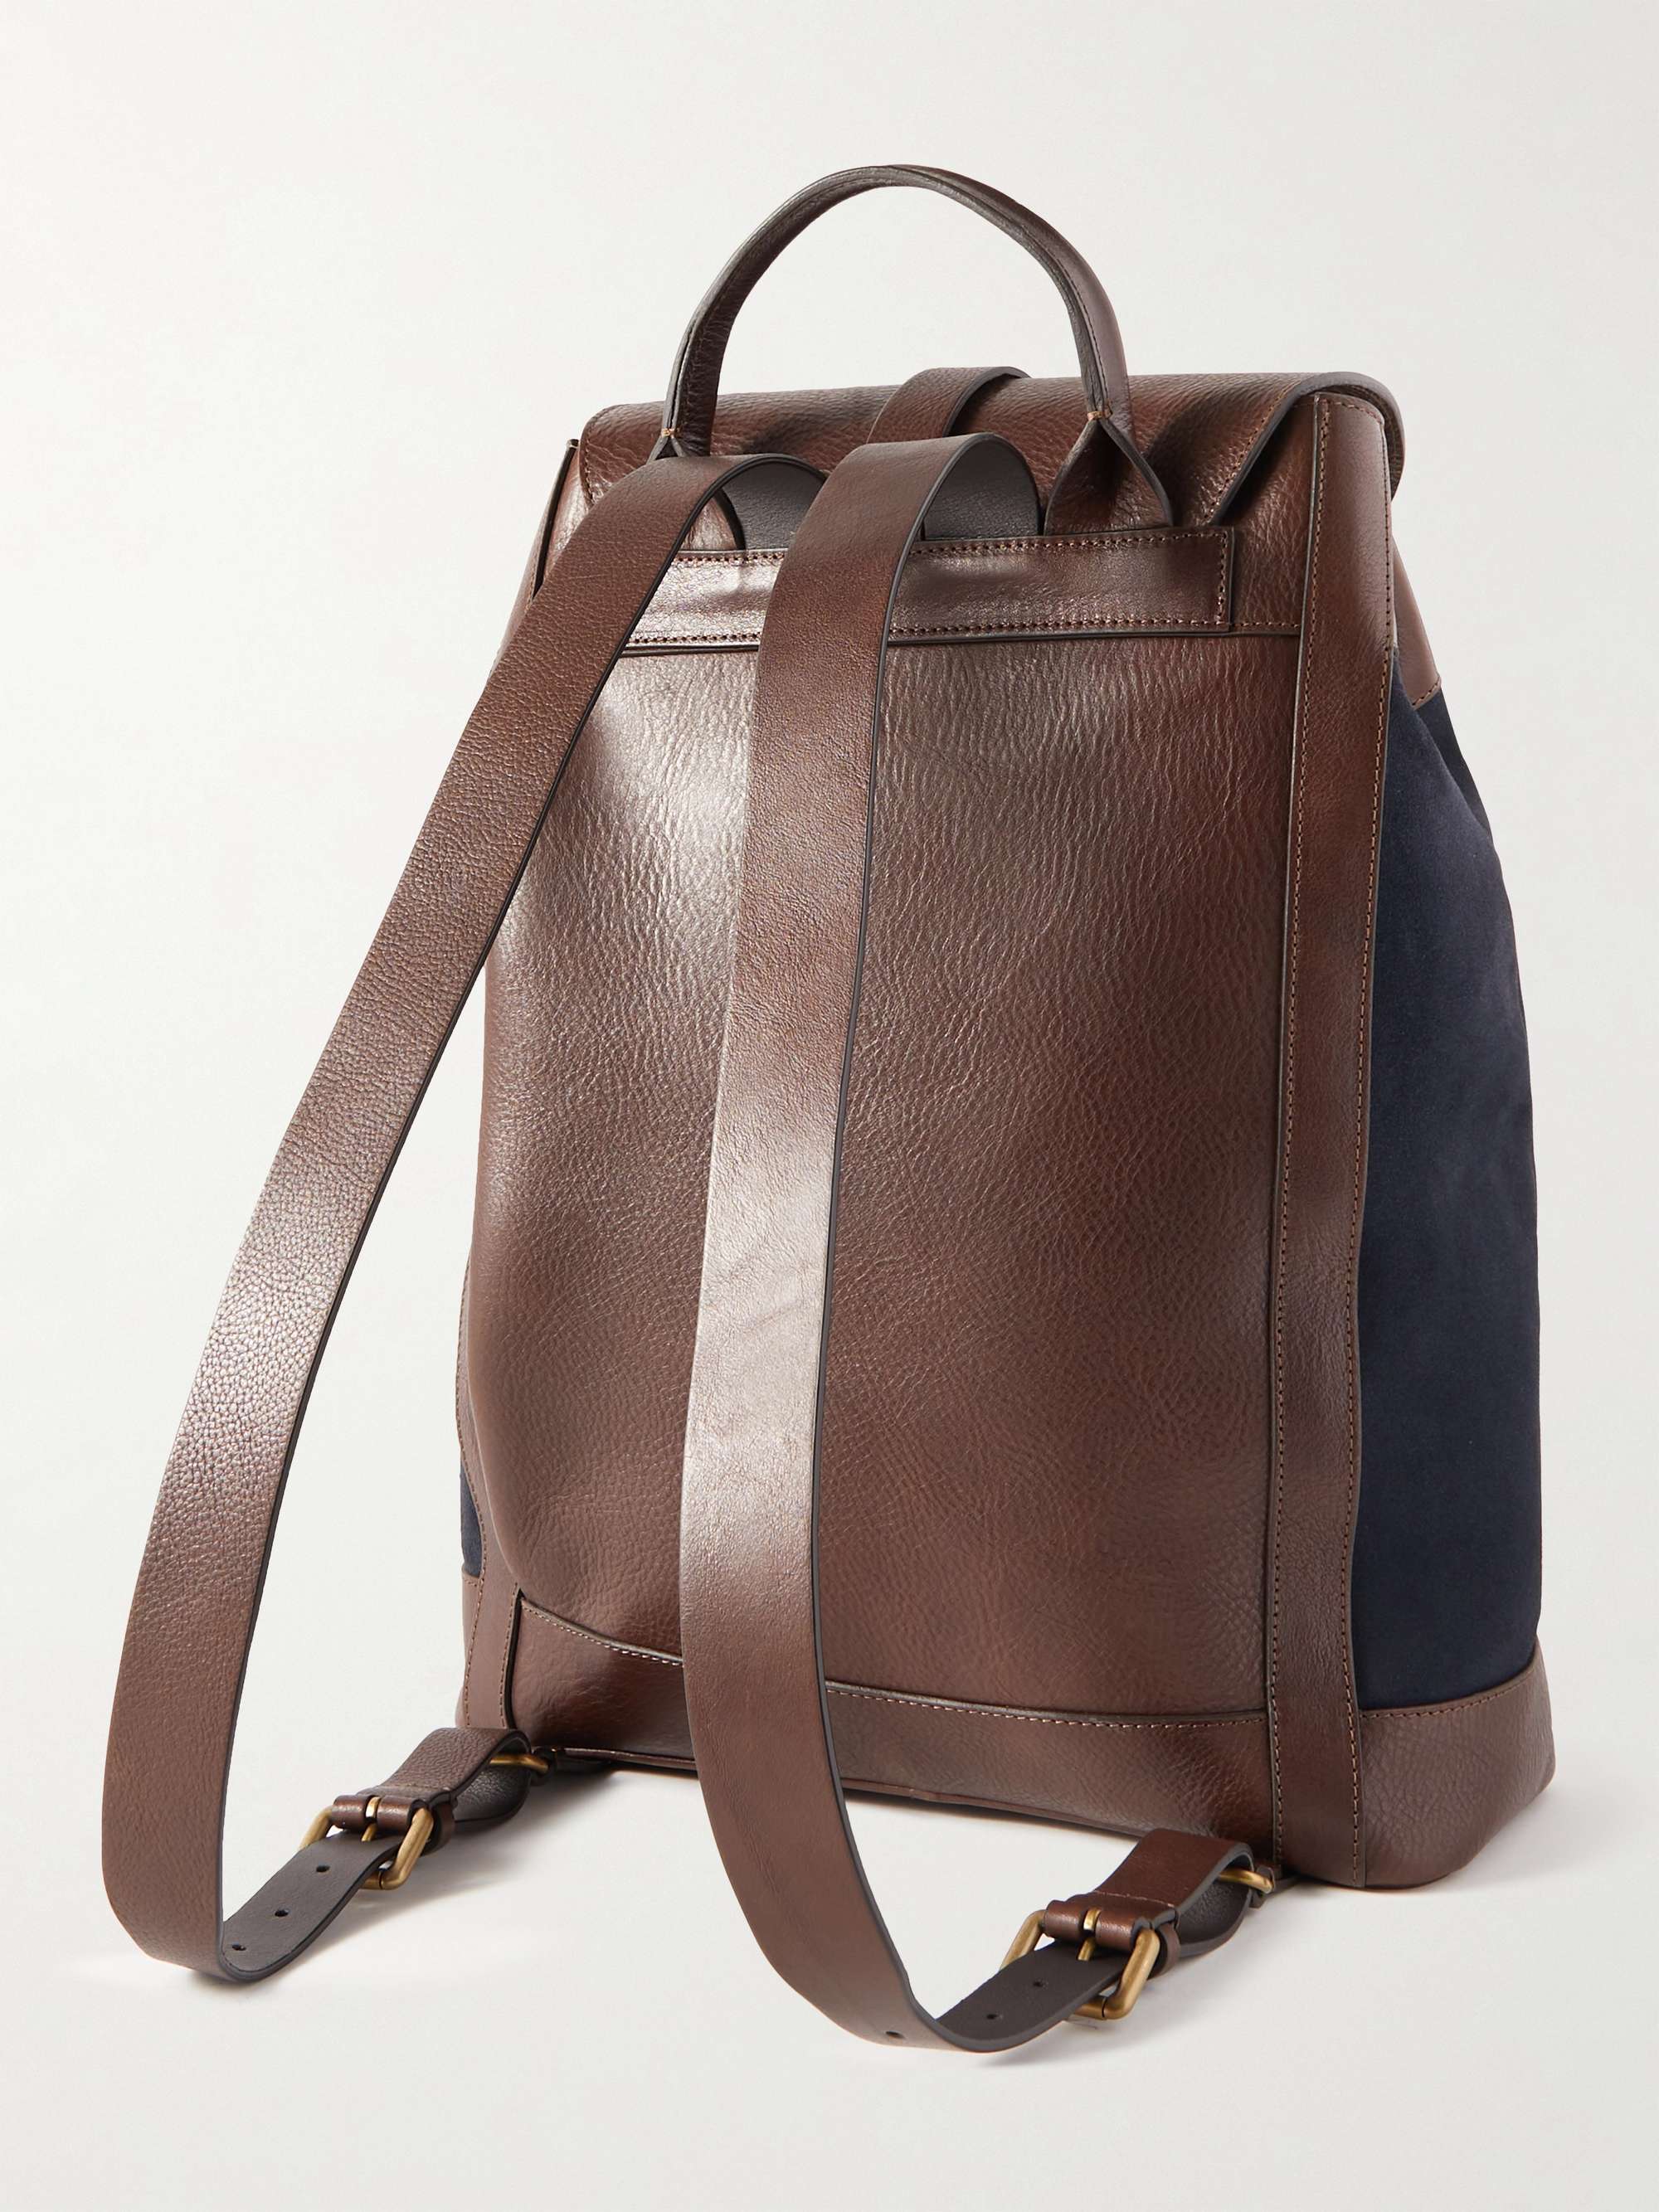 ANDERSON'S Textured Leather-Trimmed Suede Backpack